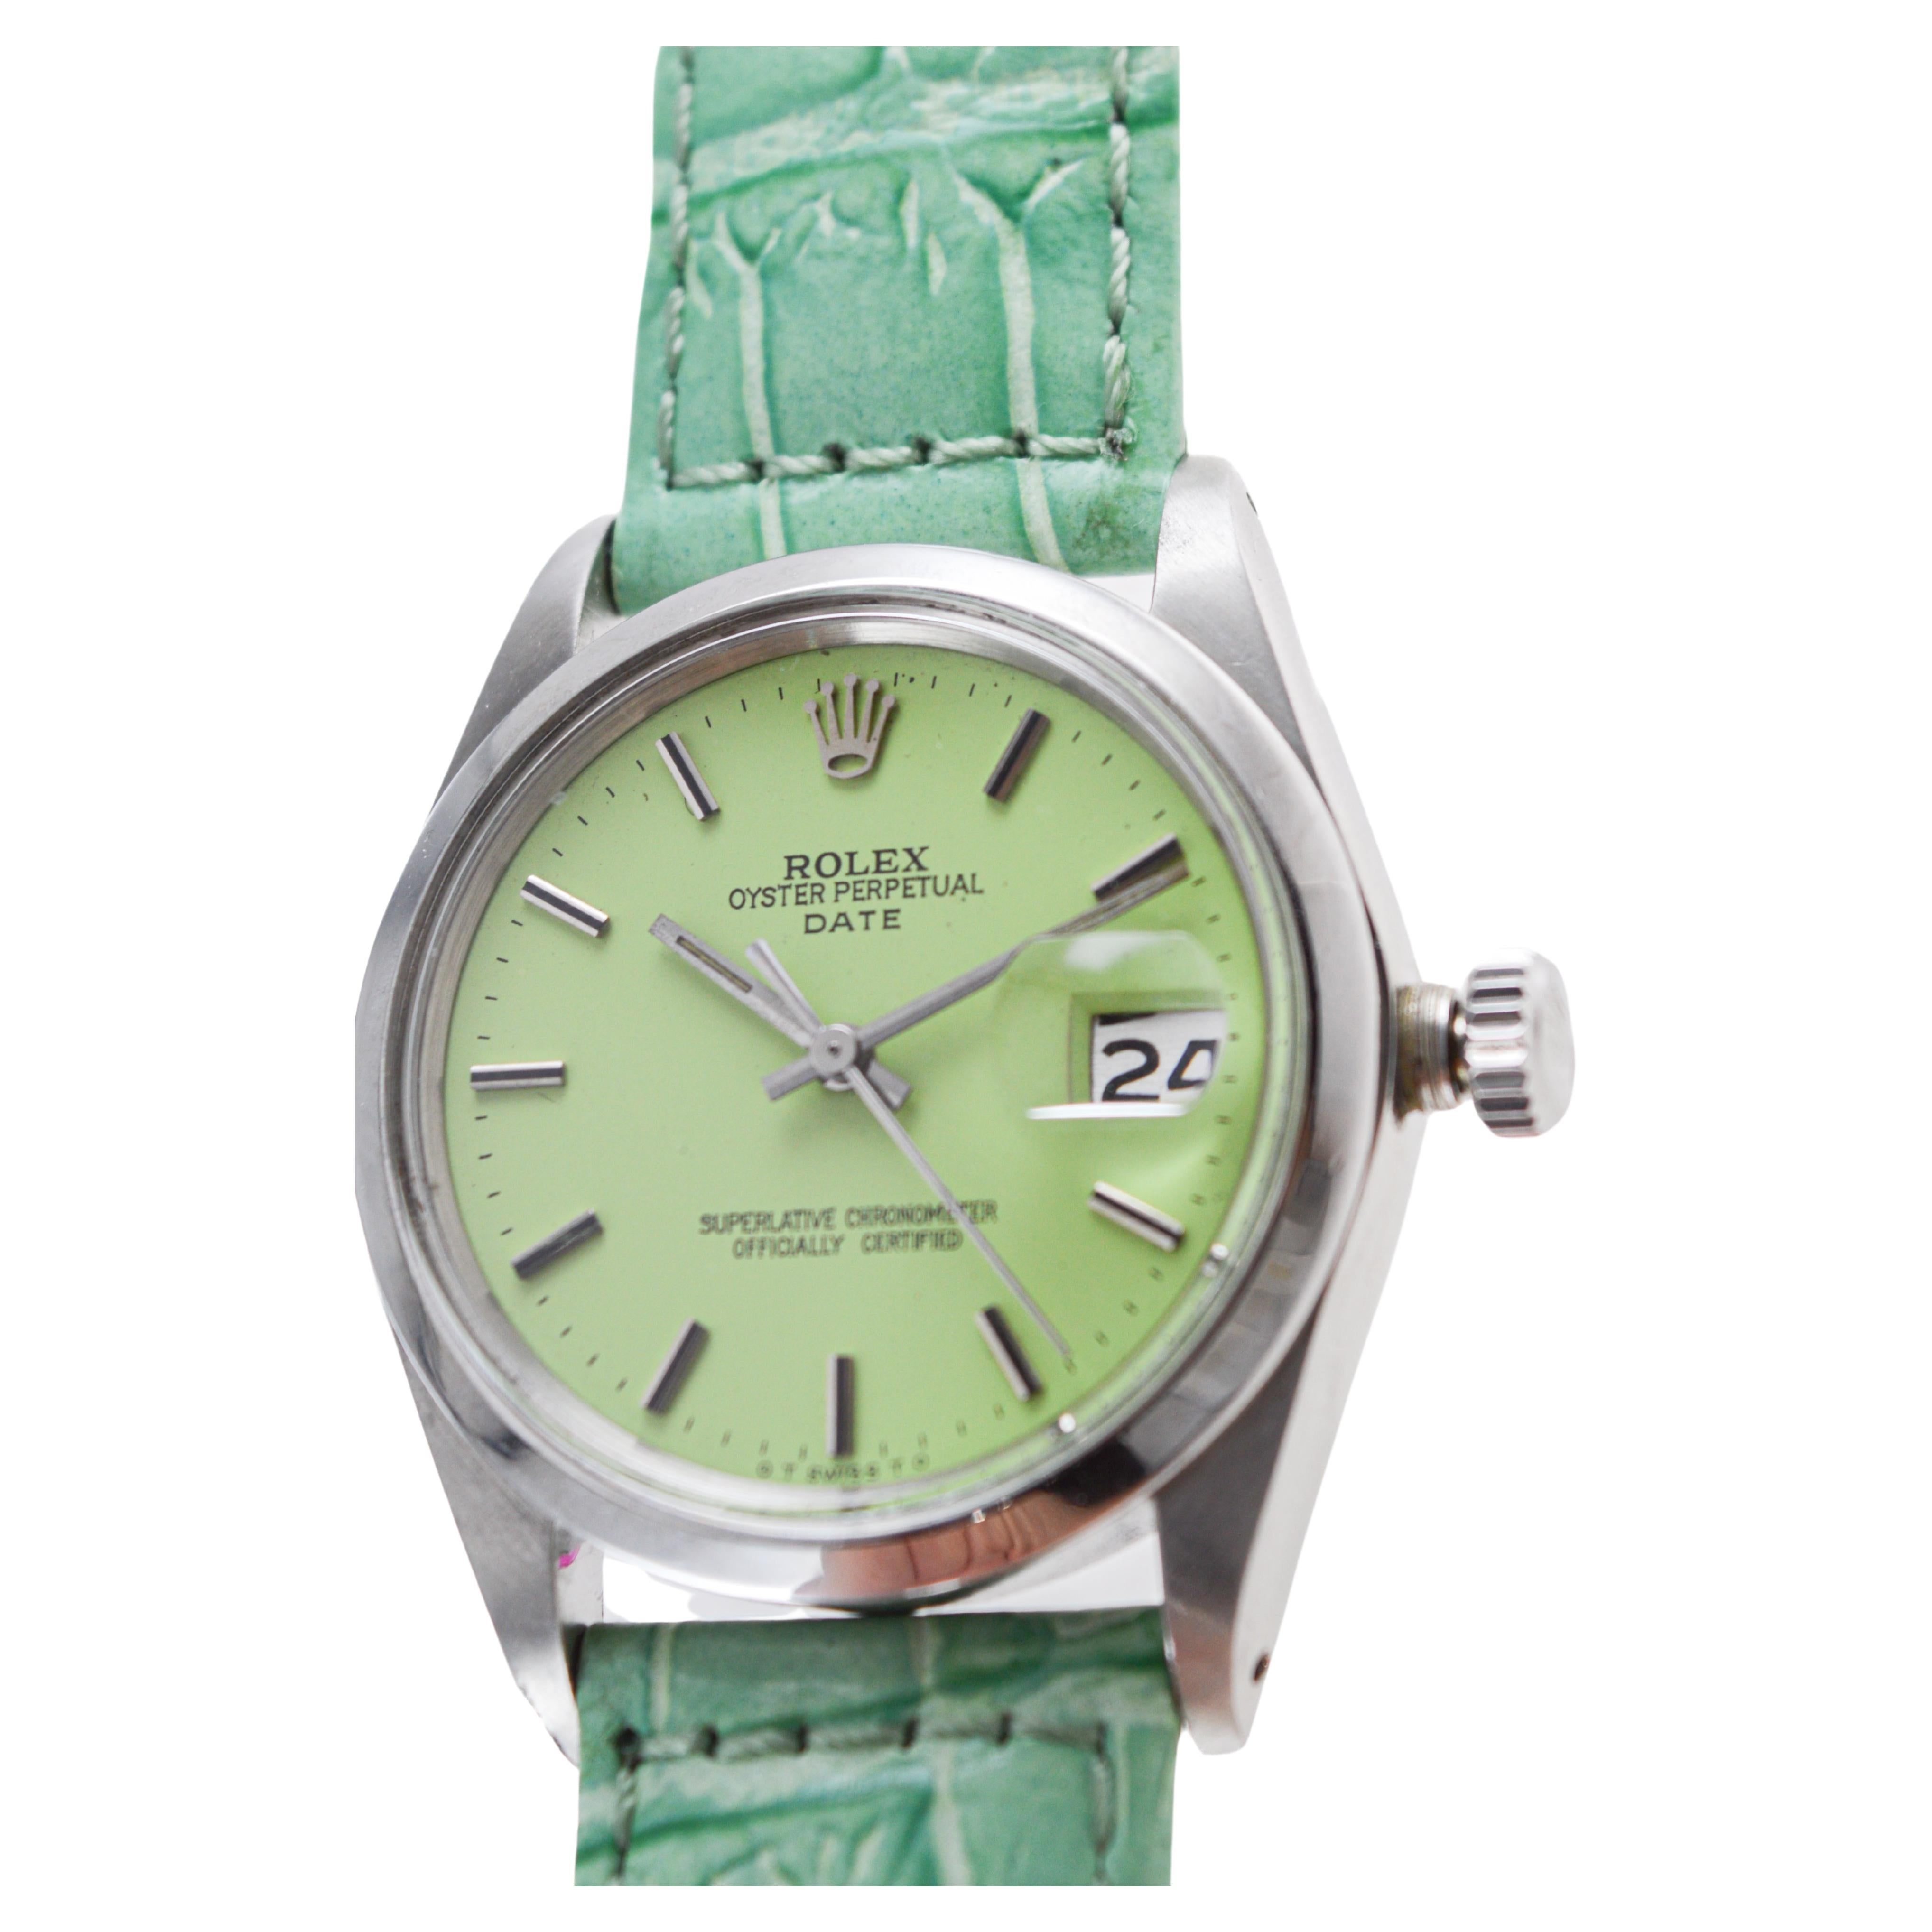 Rolex Steel Oyster Perpetual Date With Custom Made Light Green Dial circa 1970's For Sale 3